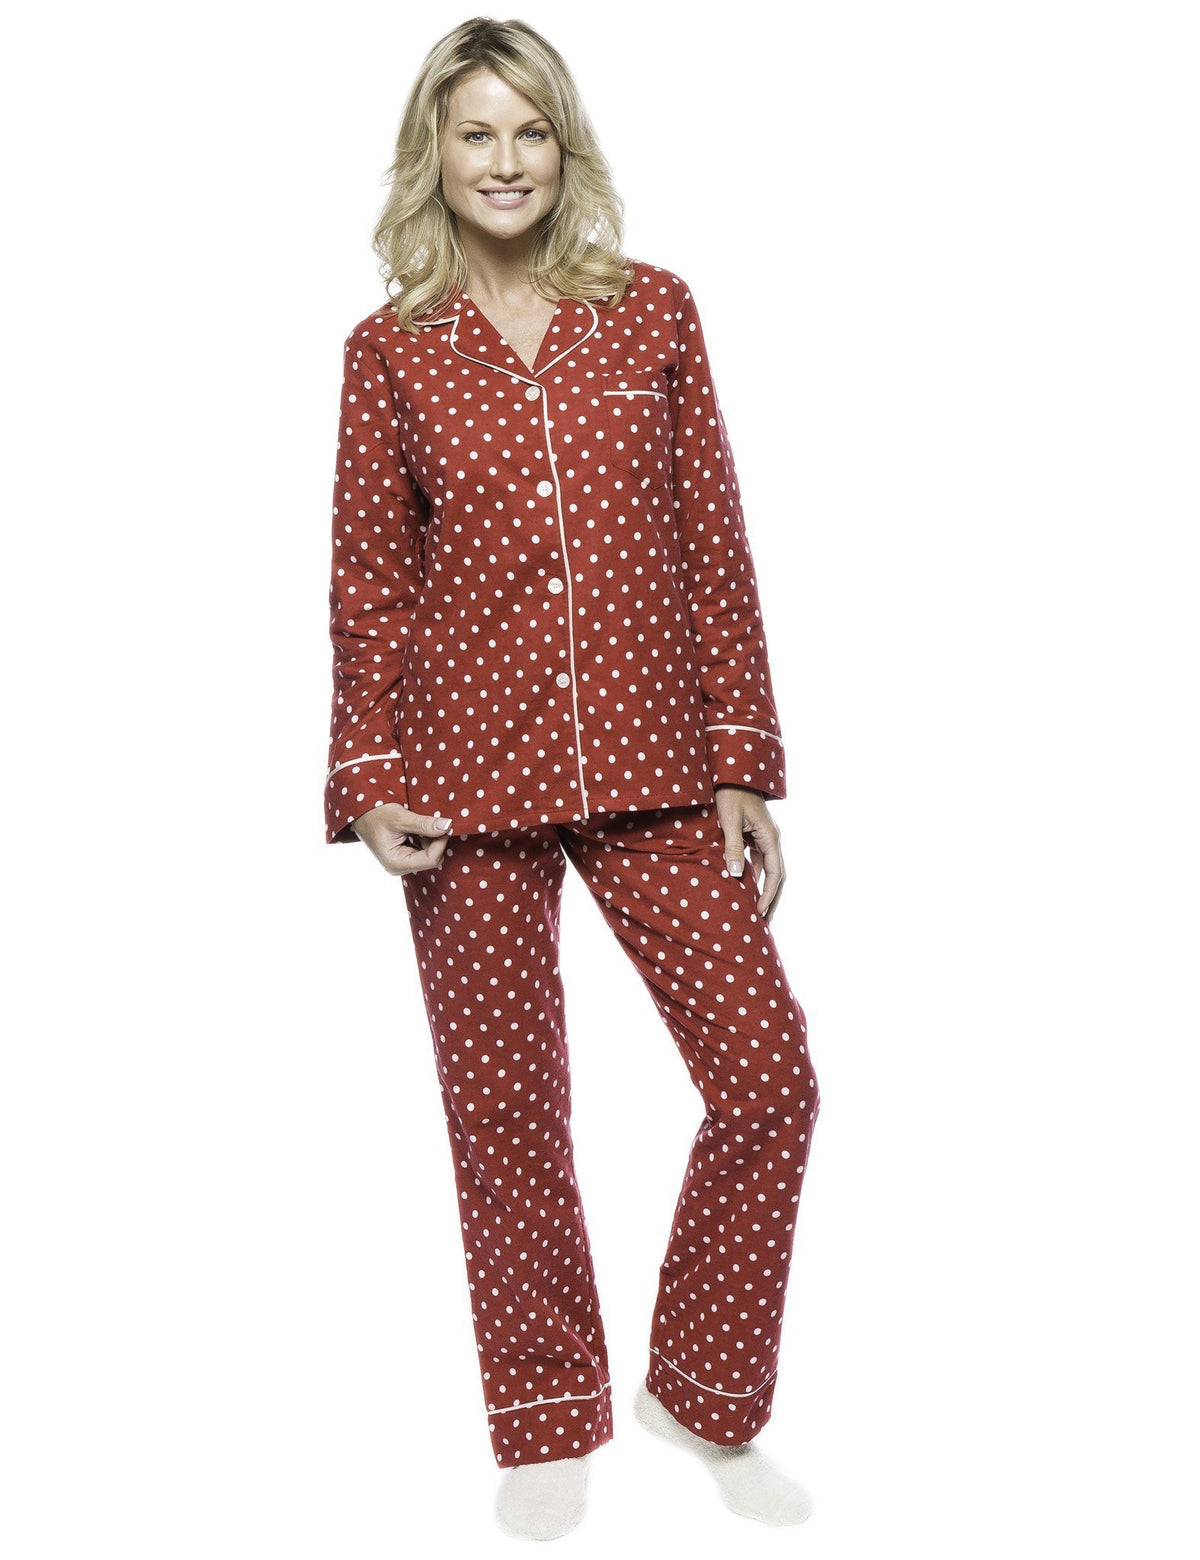 Boxed Pacakged Womens Premium Cotton Flannel Pajama Sleepwear Set with Free Plush Socks - Dots Diva Red